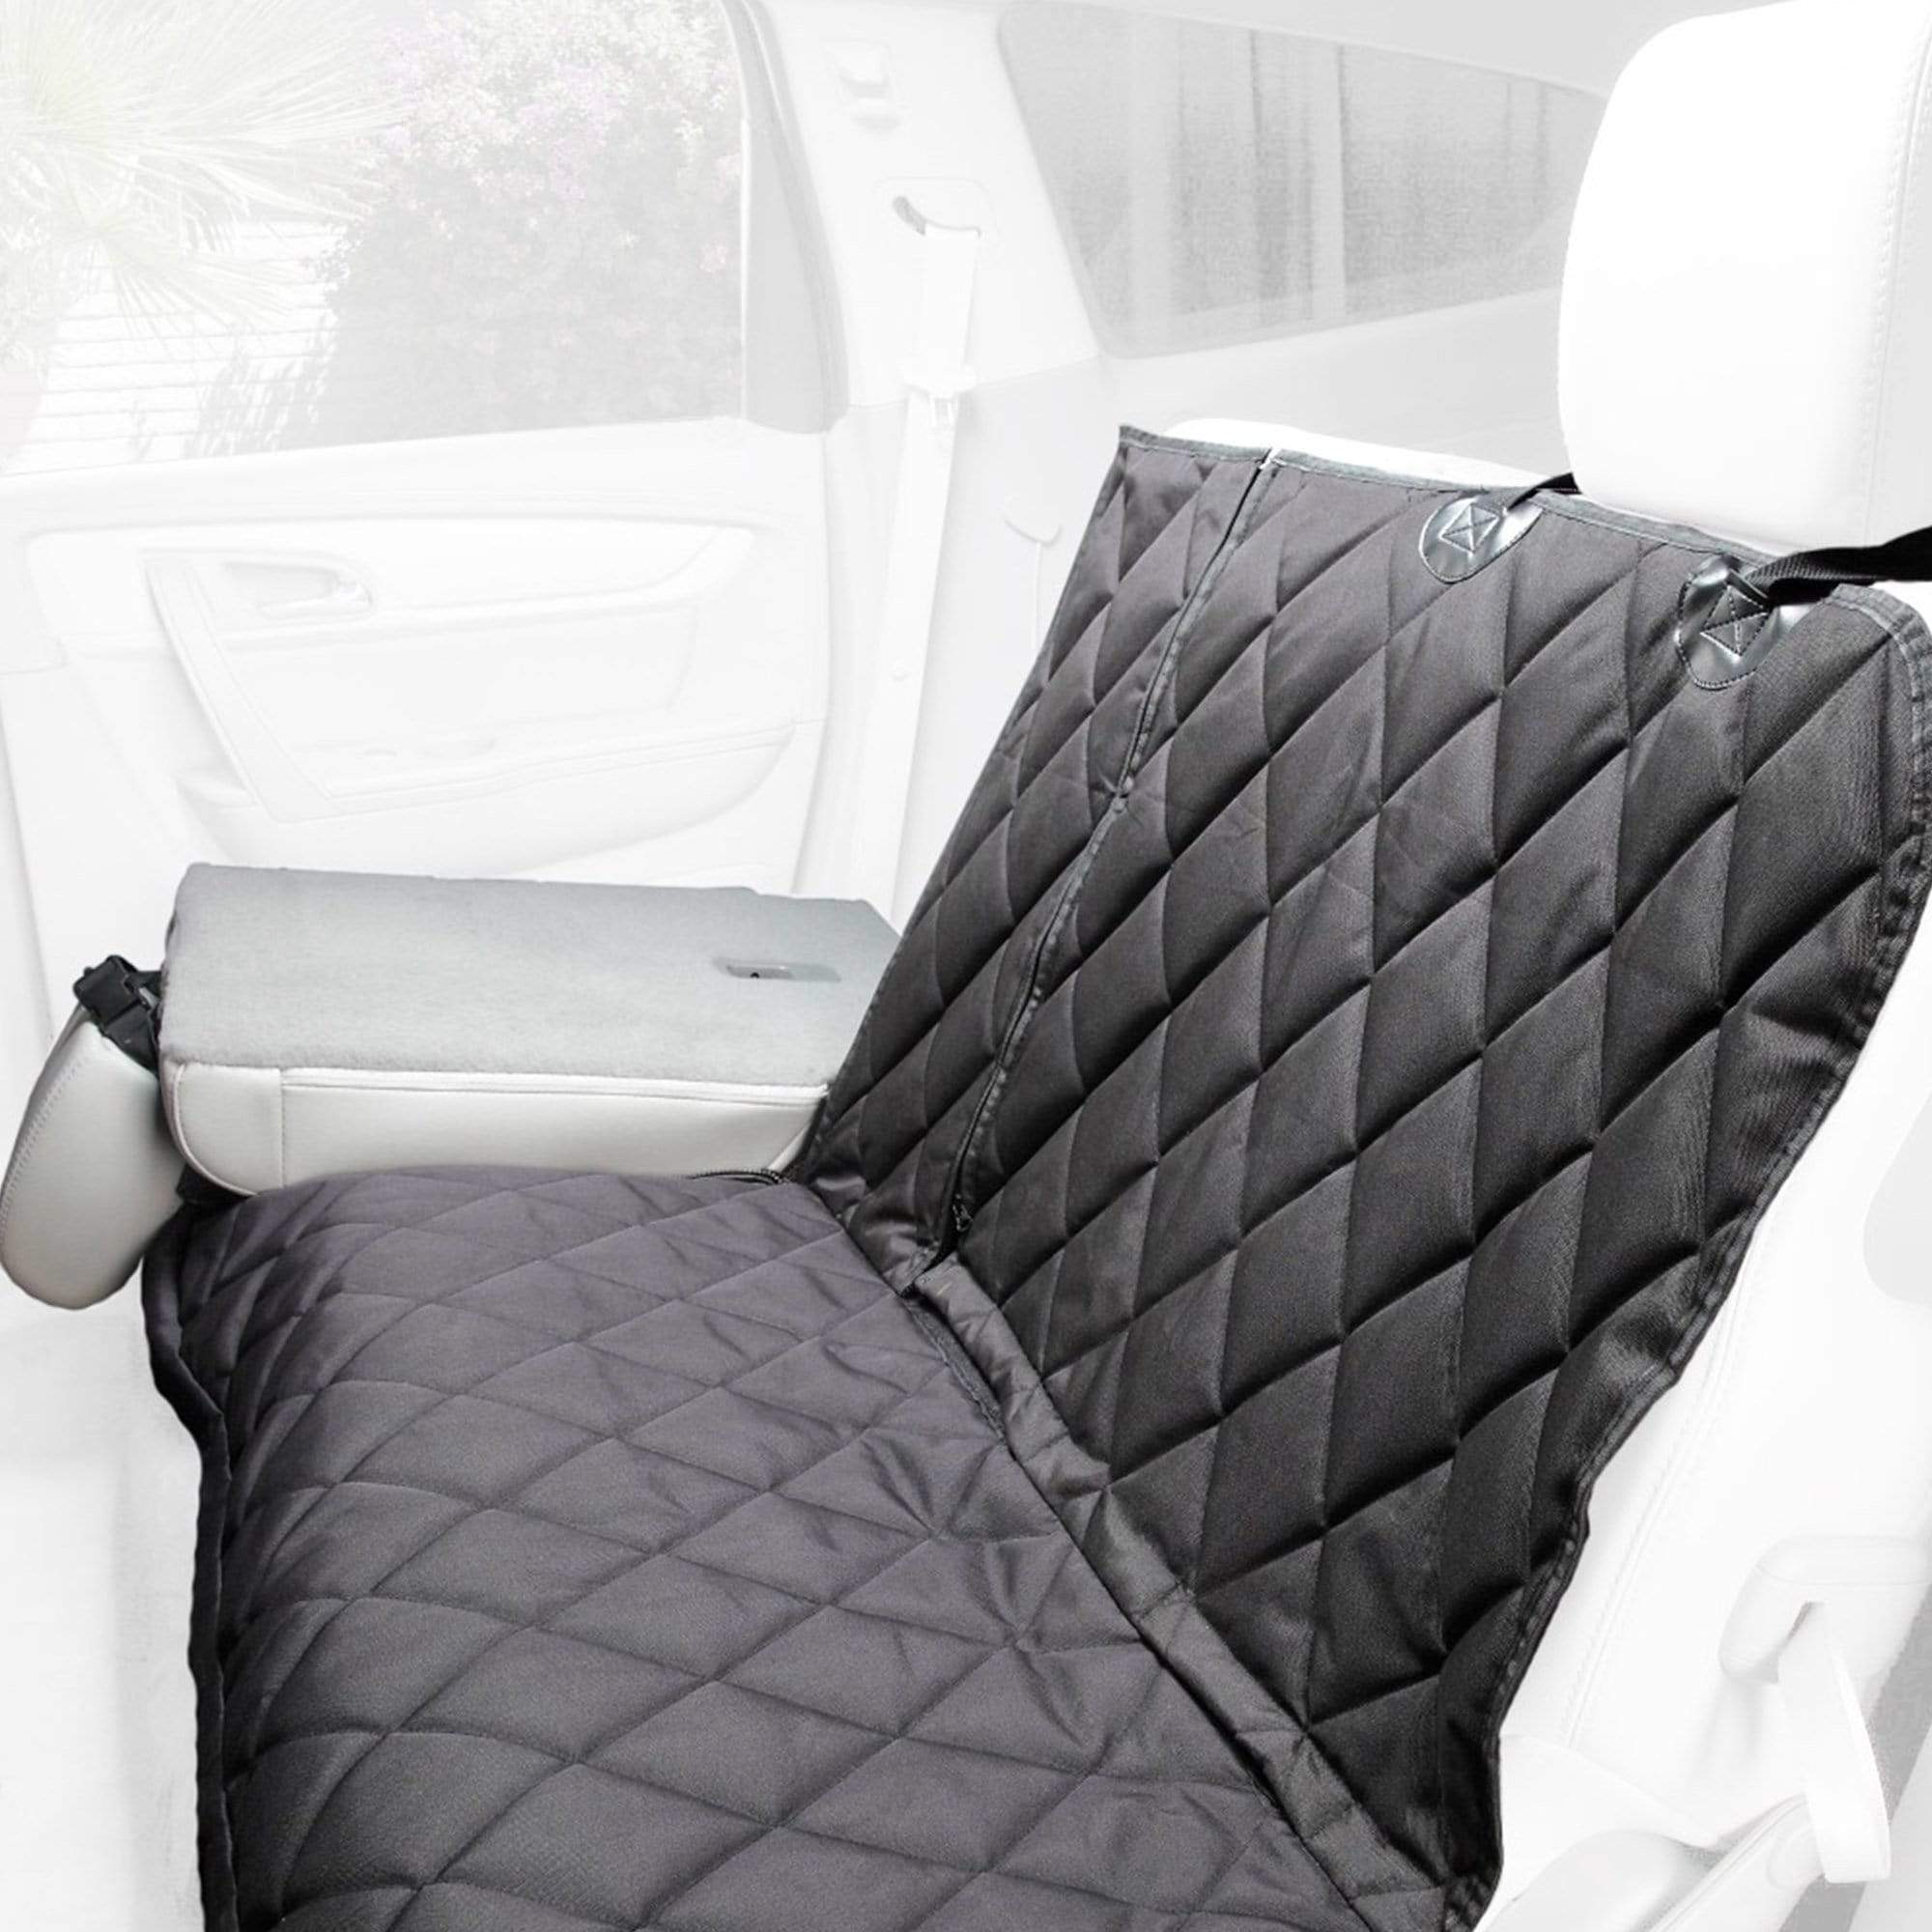 3 Dog Pet Supply Quilted Back Seat Protector - Large